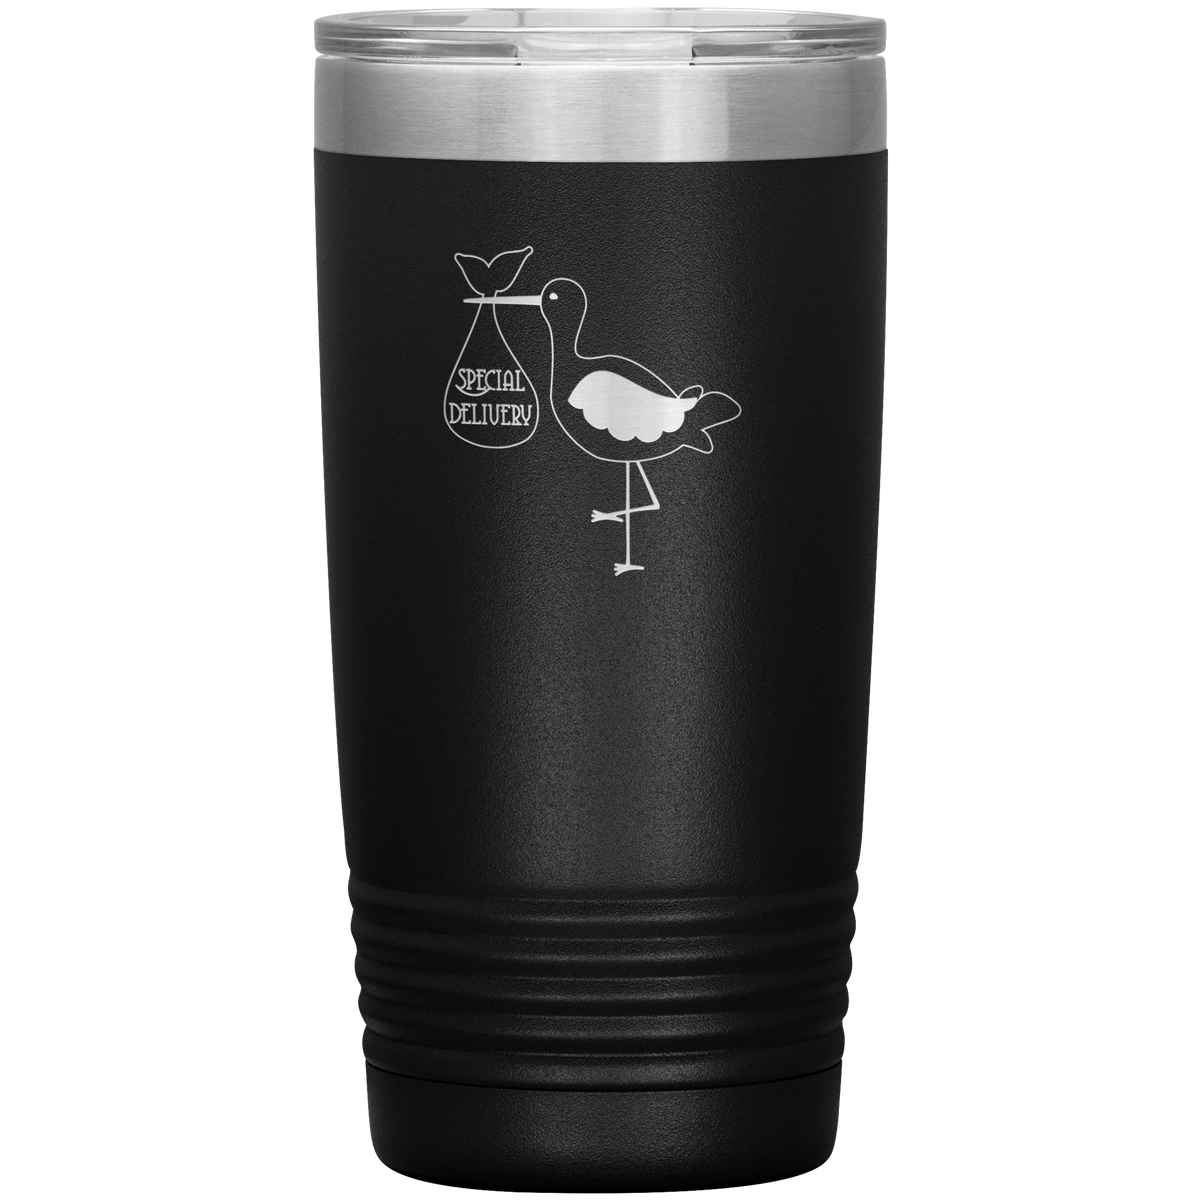 Special delivery stork 20 oz stainless steel Vacuum insulated hot and cold beverage Tumbler